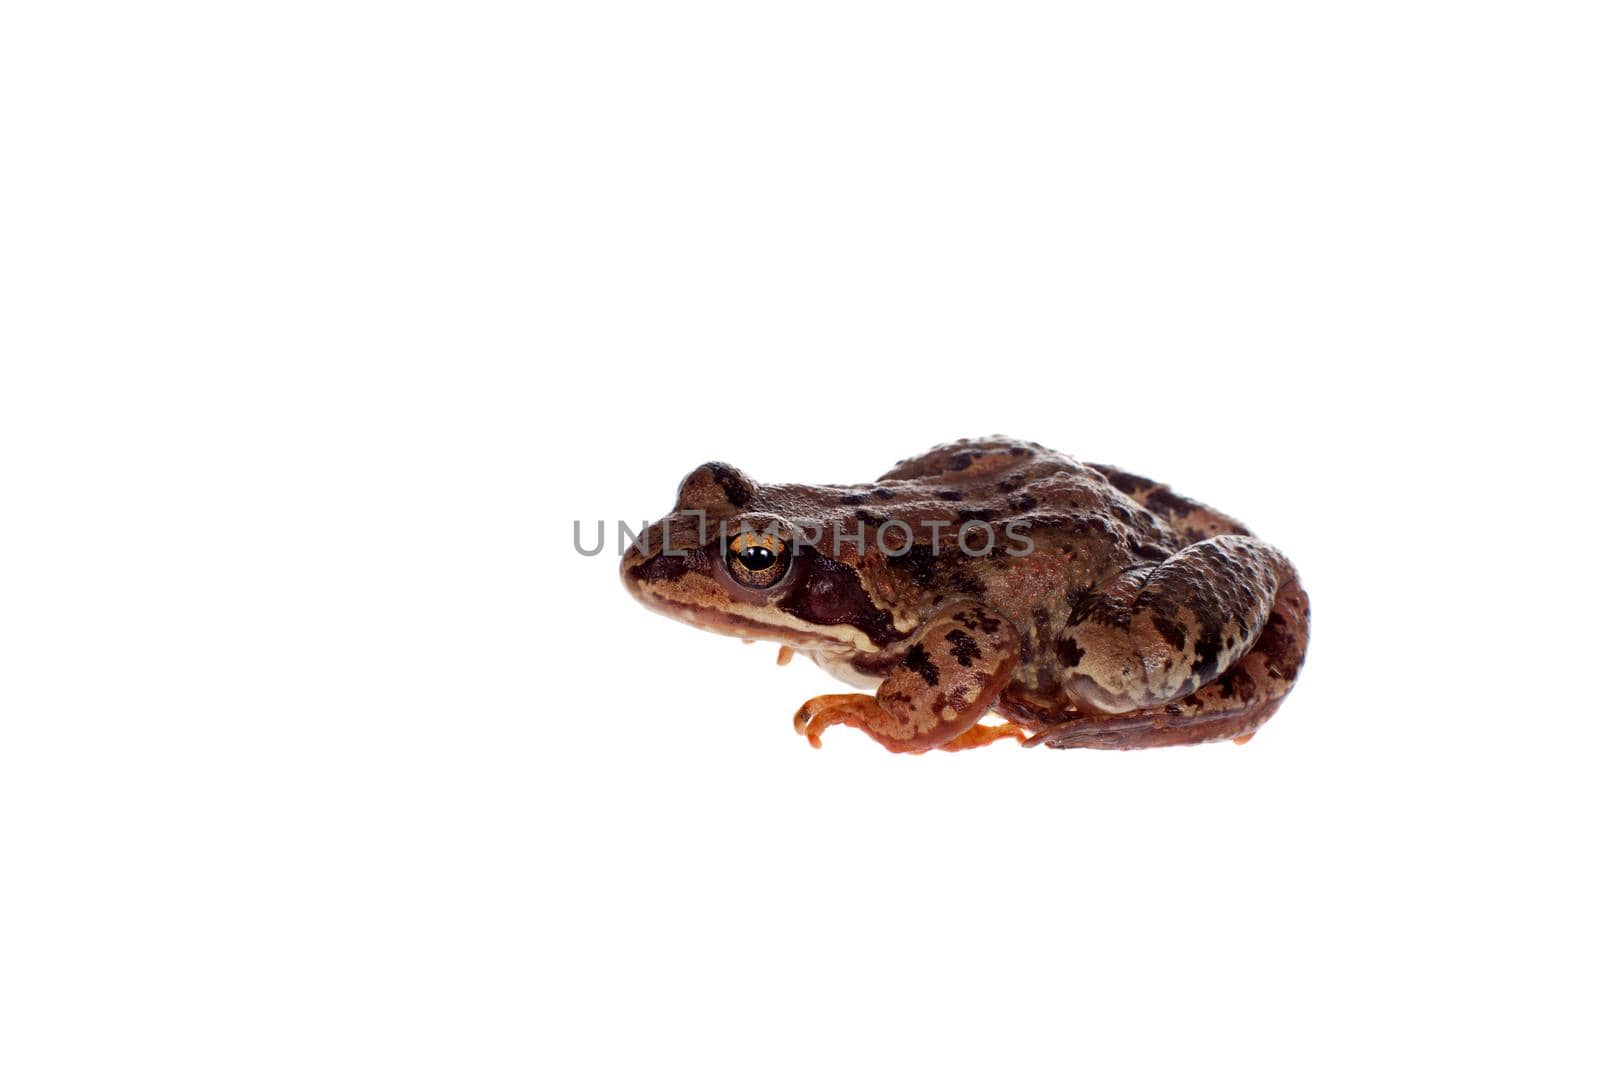 Common brown frog sitting on white background by RosaJay